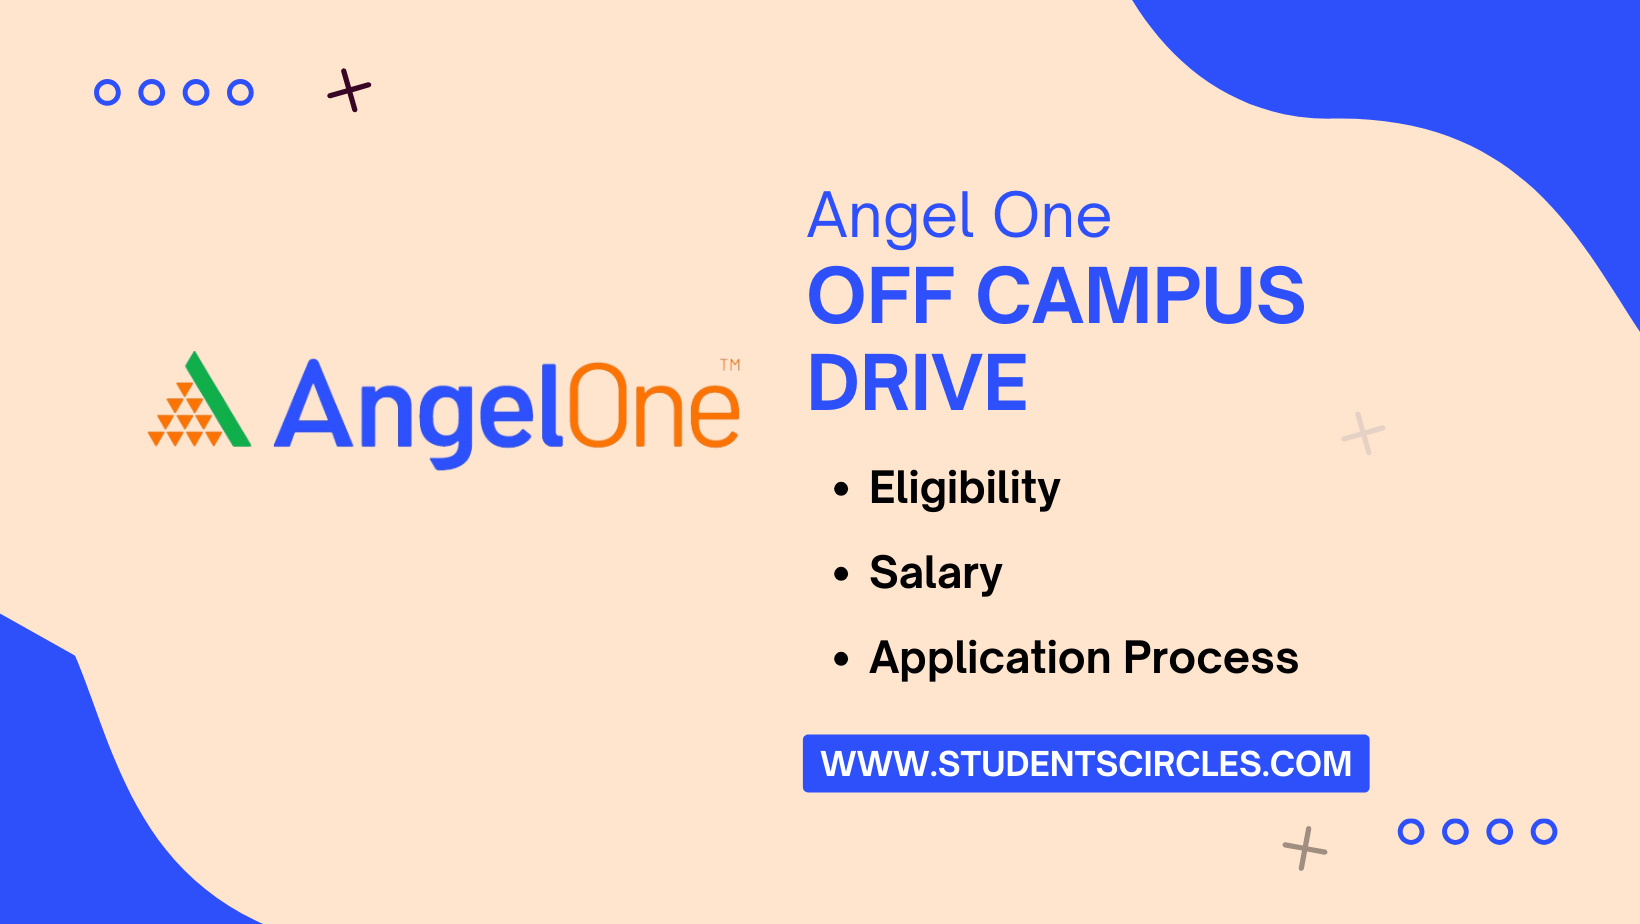 Angel One Off Campus Drive